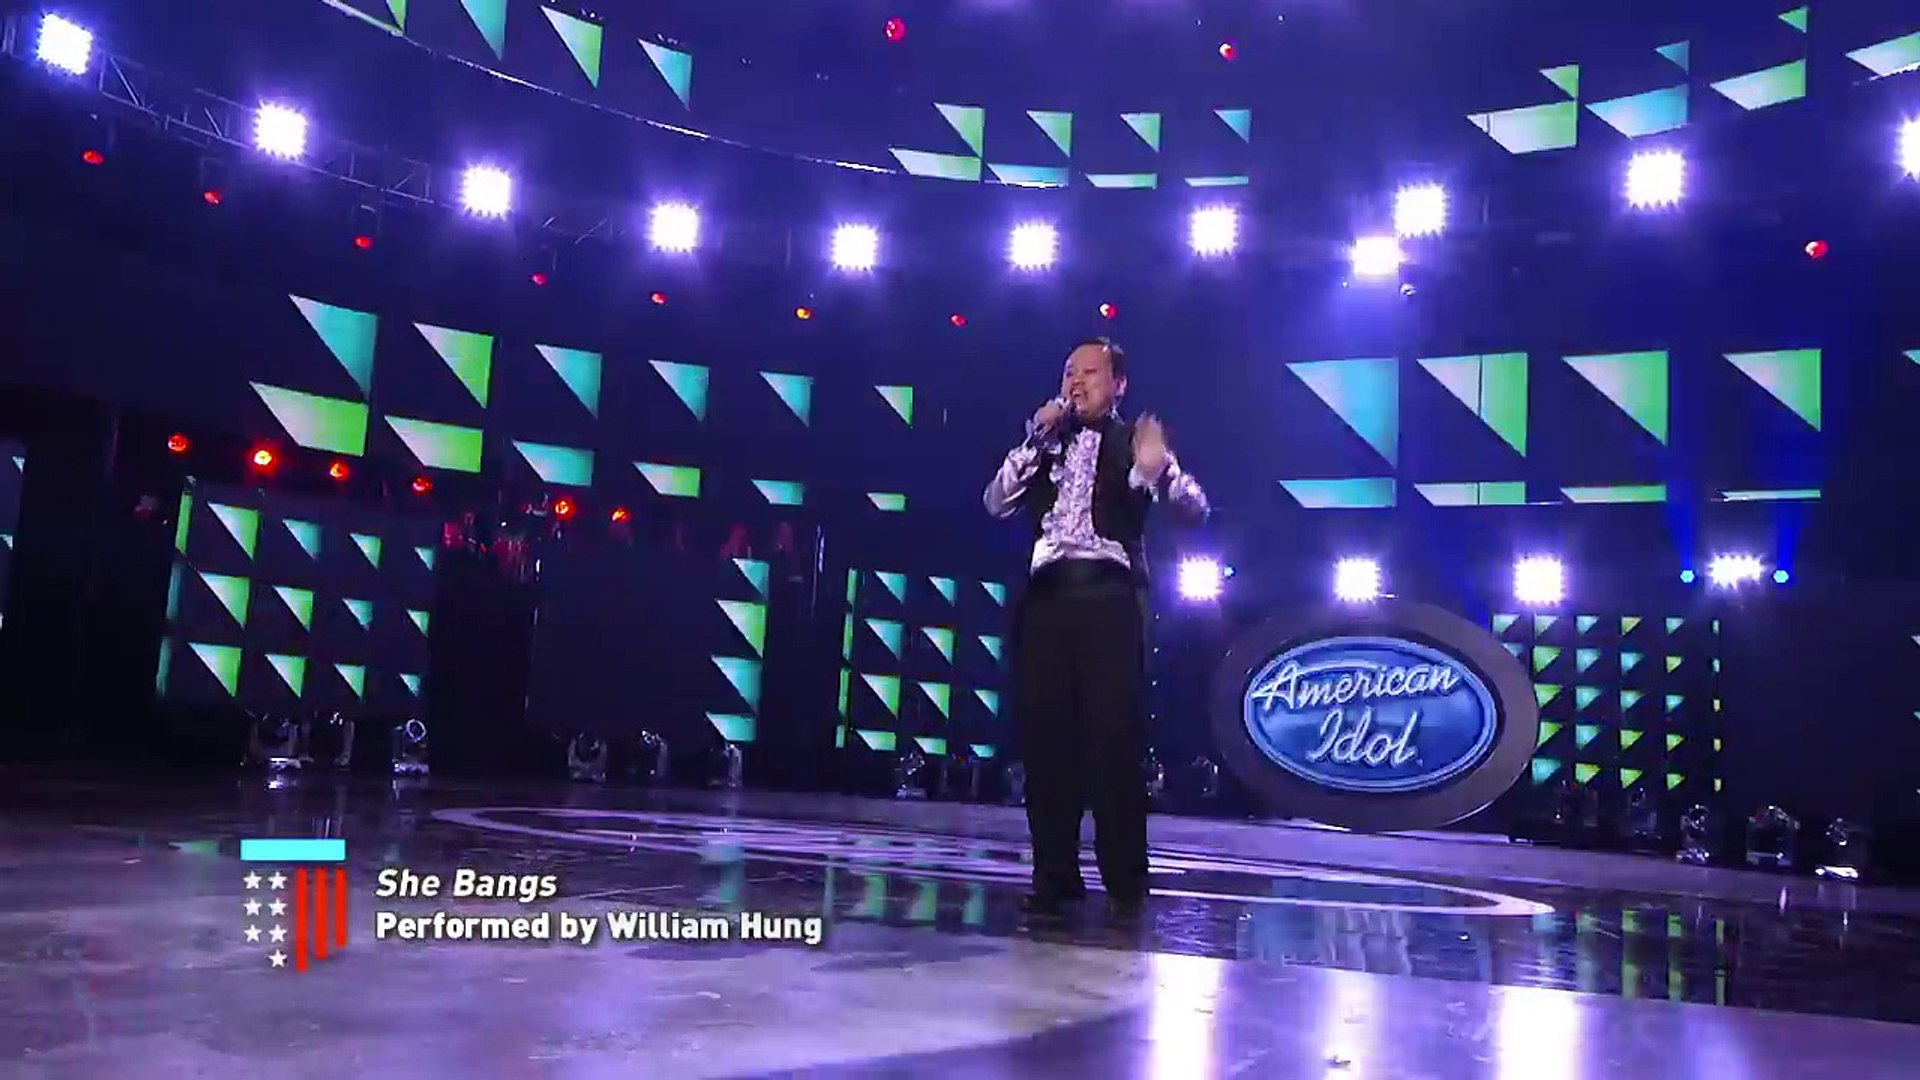 William Hung Performs She Bangs - AMERICAN IDOL - Dailymotion Video